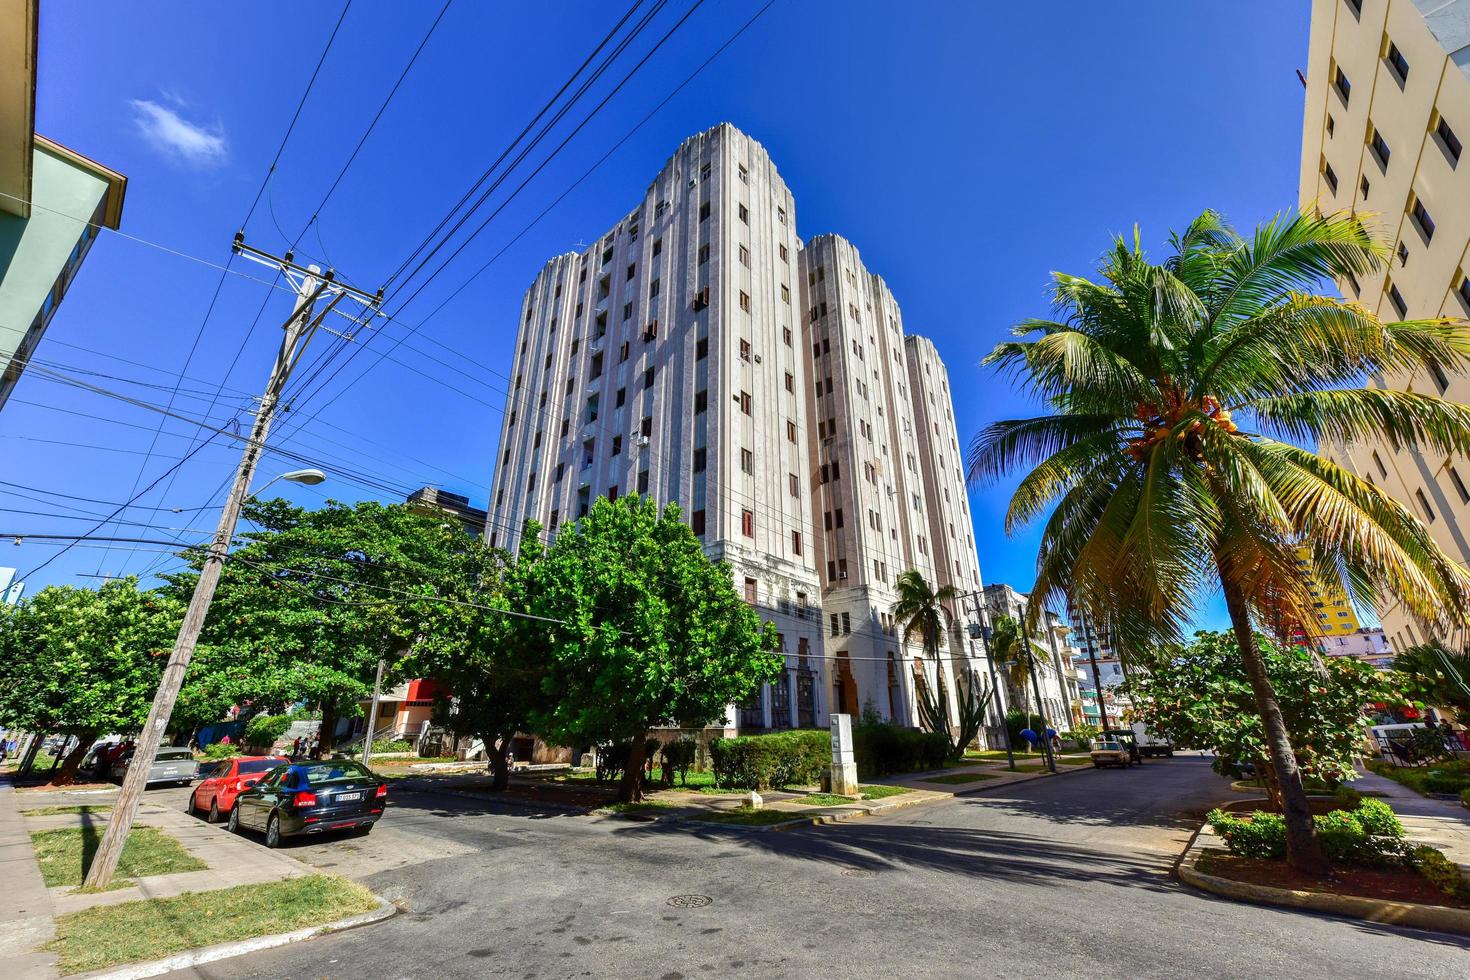 The Lopez Serrano Building in Vedado district of Havana, Cuba. It is considered the first Cuban skyscraper as it reproduces, the model of tall New York art deco buildings, 2022 photo